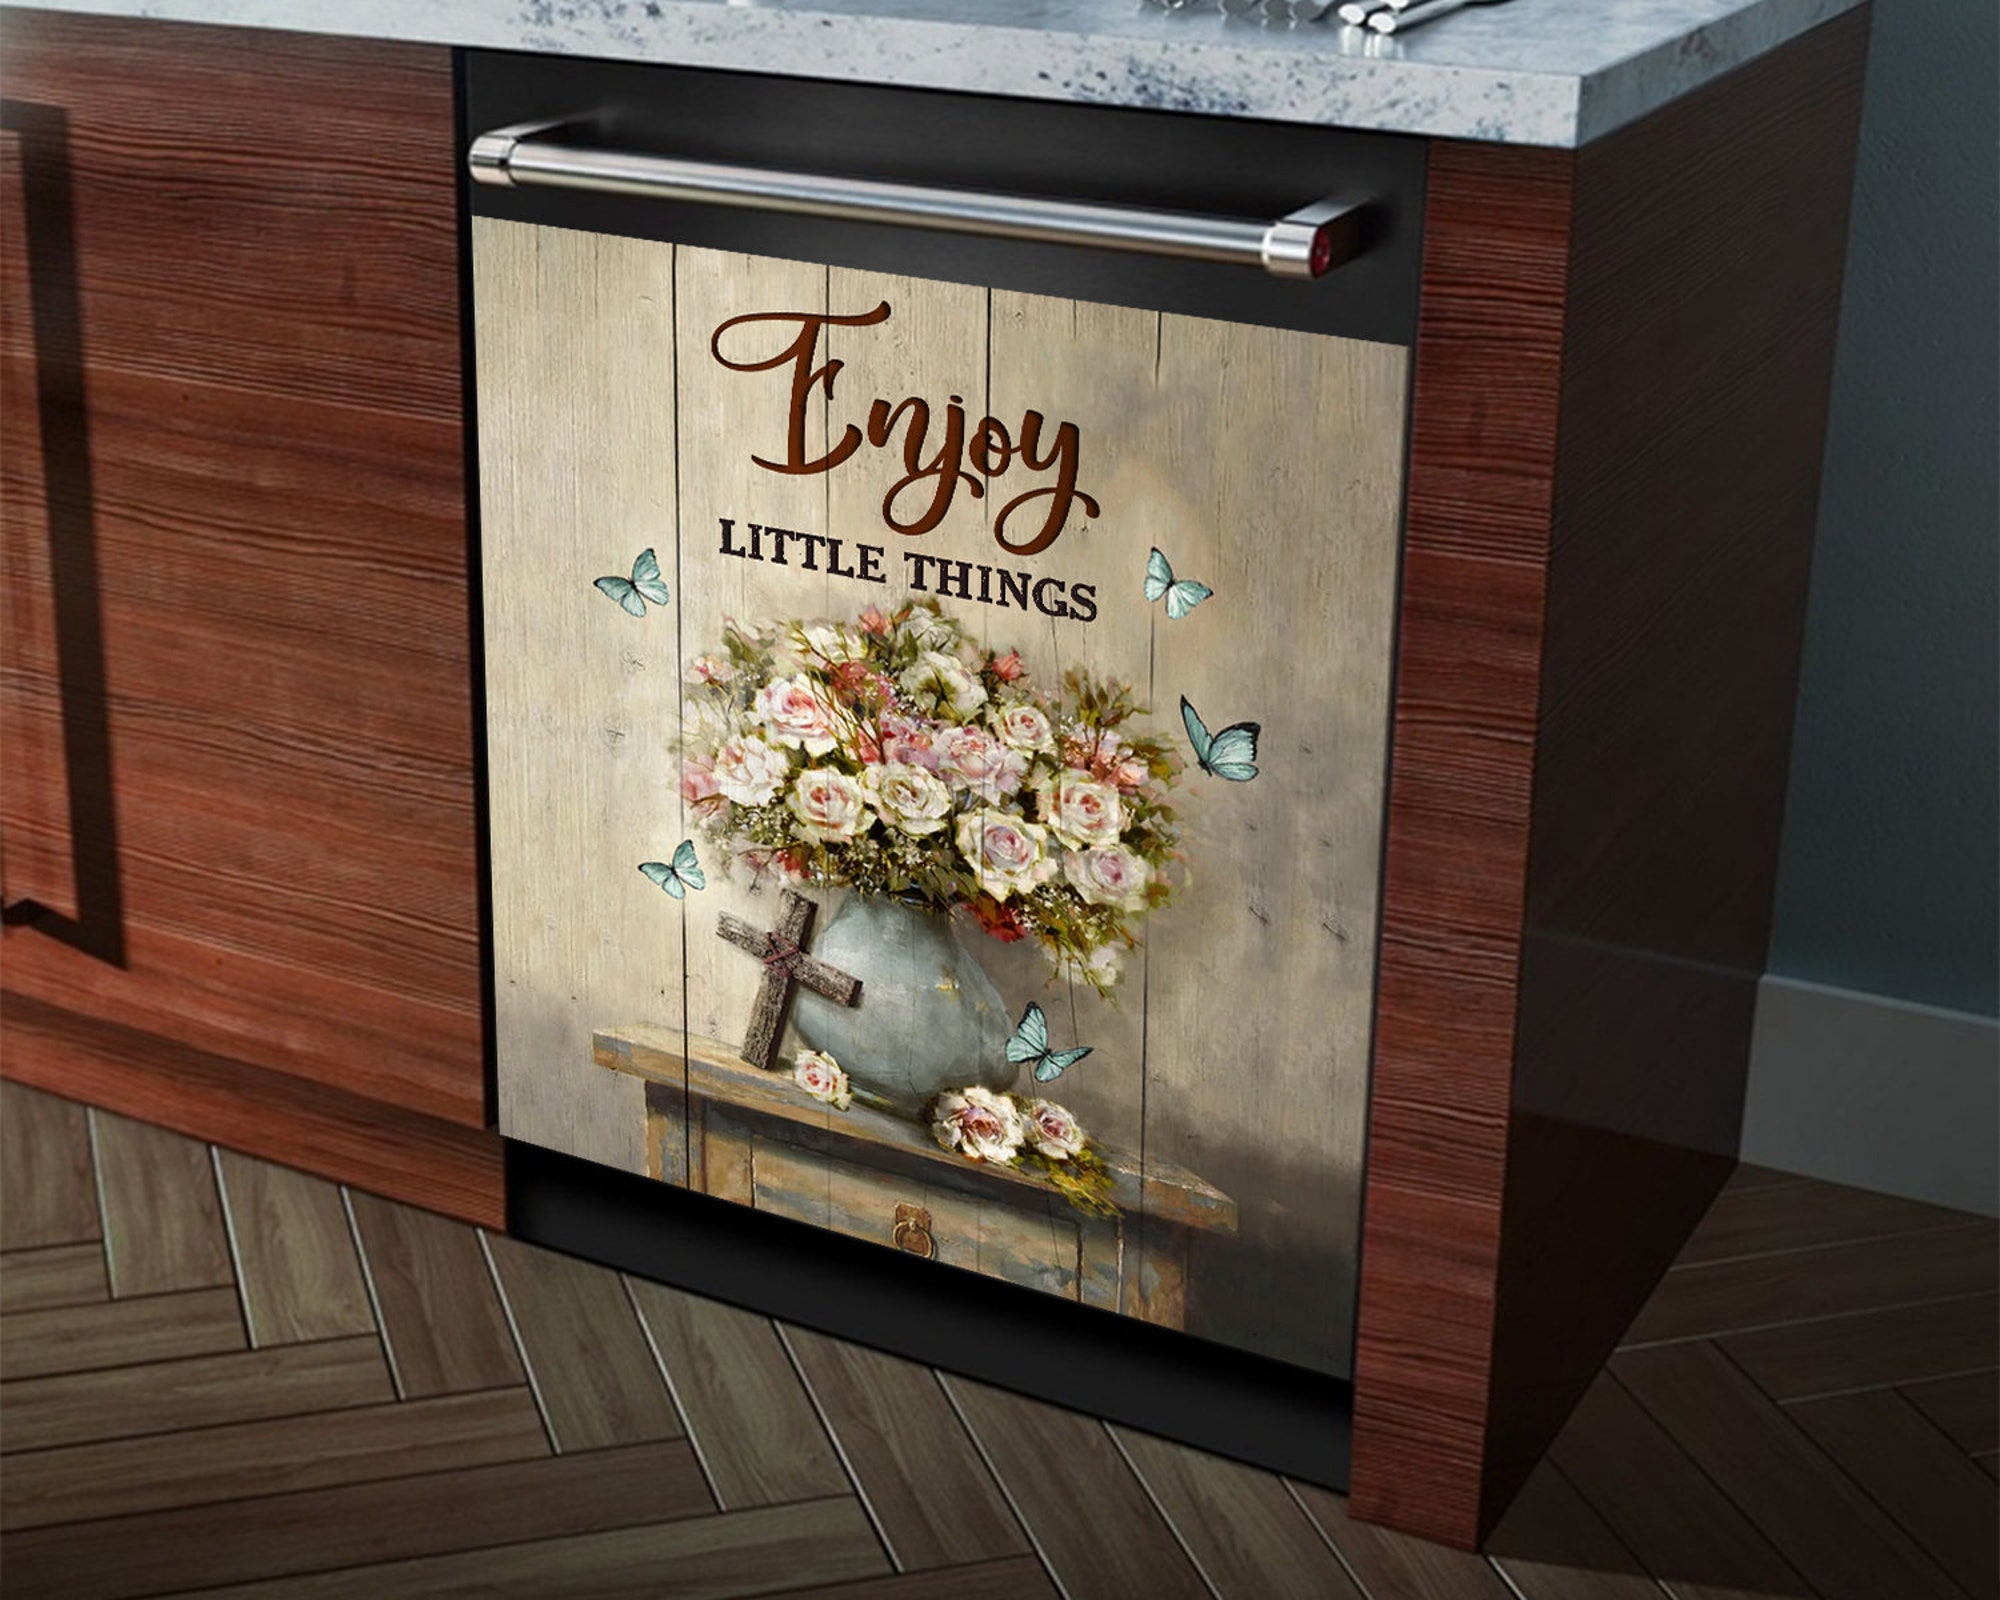 Enjoy little things, Dishwasher cover sticker, Flower and Butterfly lover, sticker, home decor